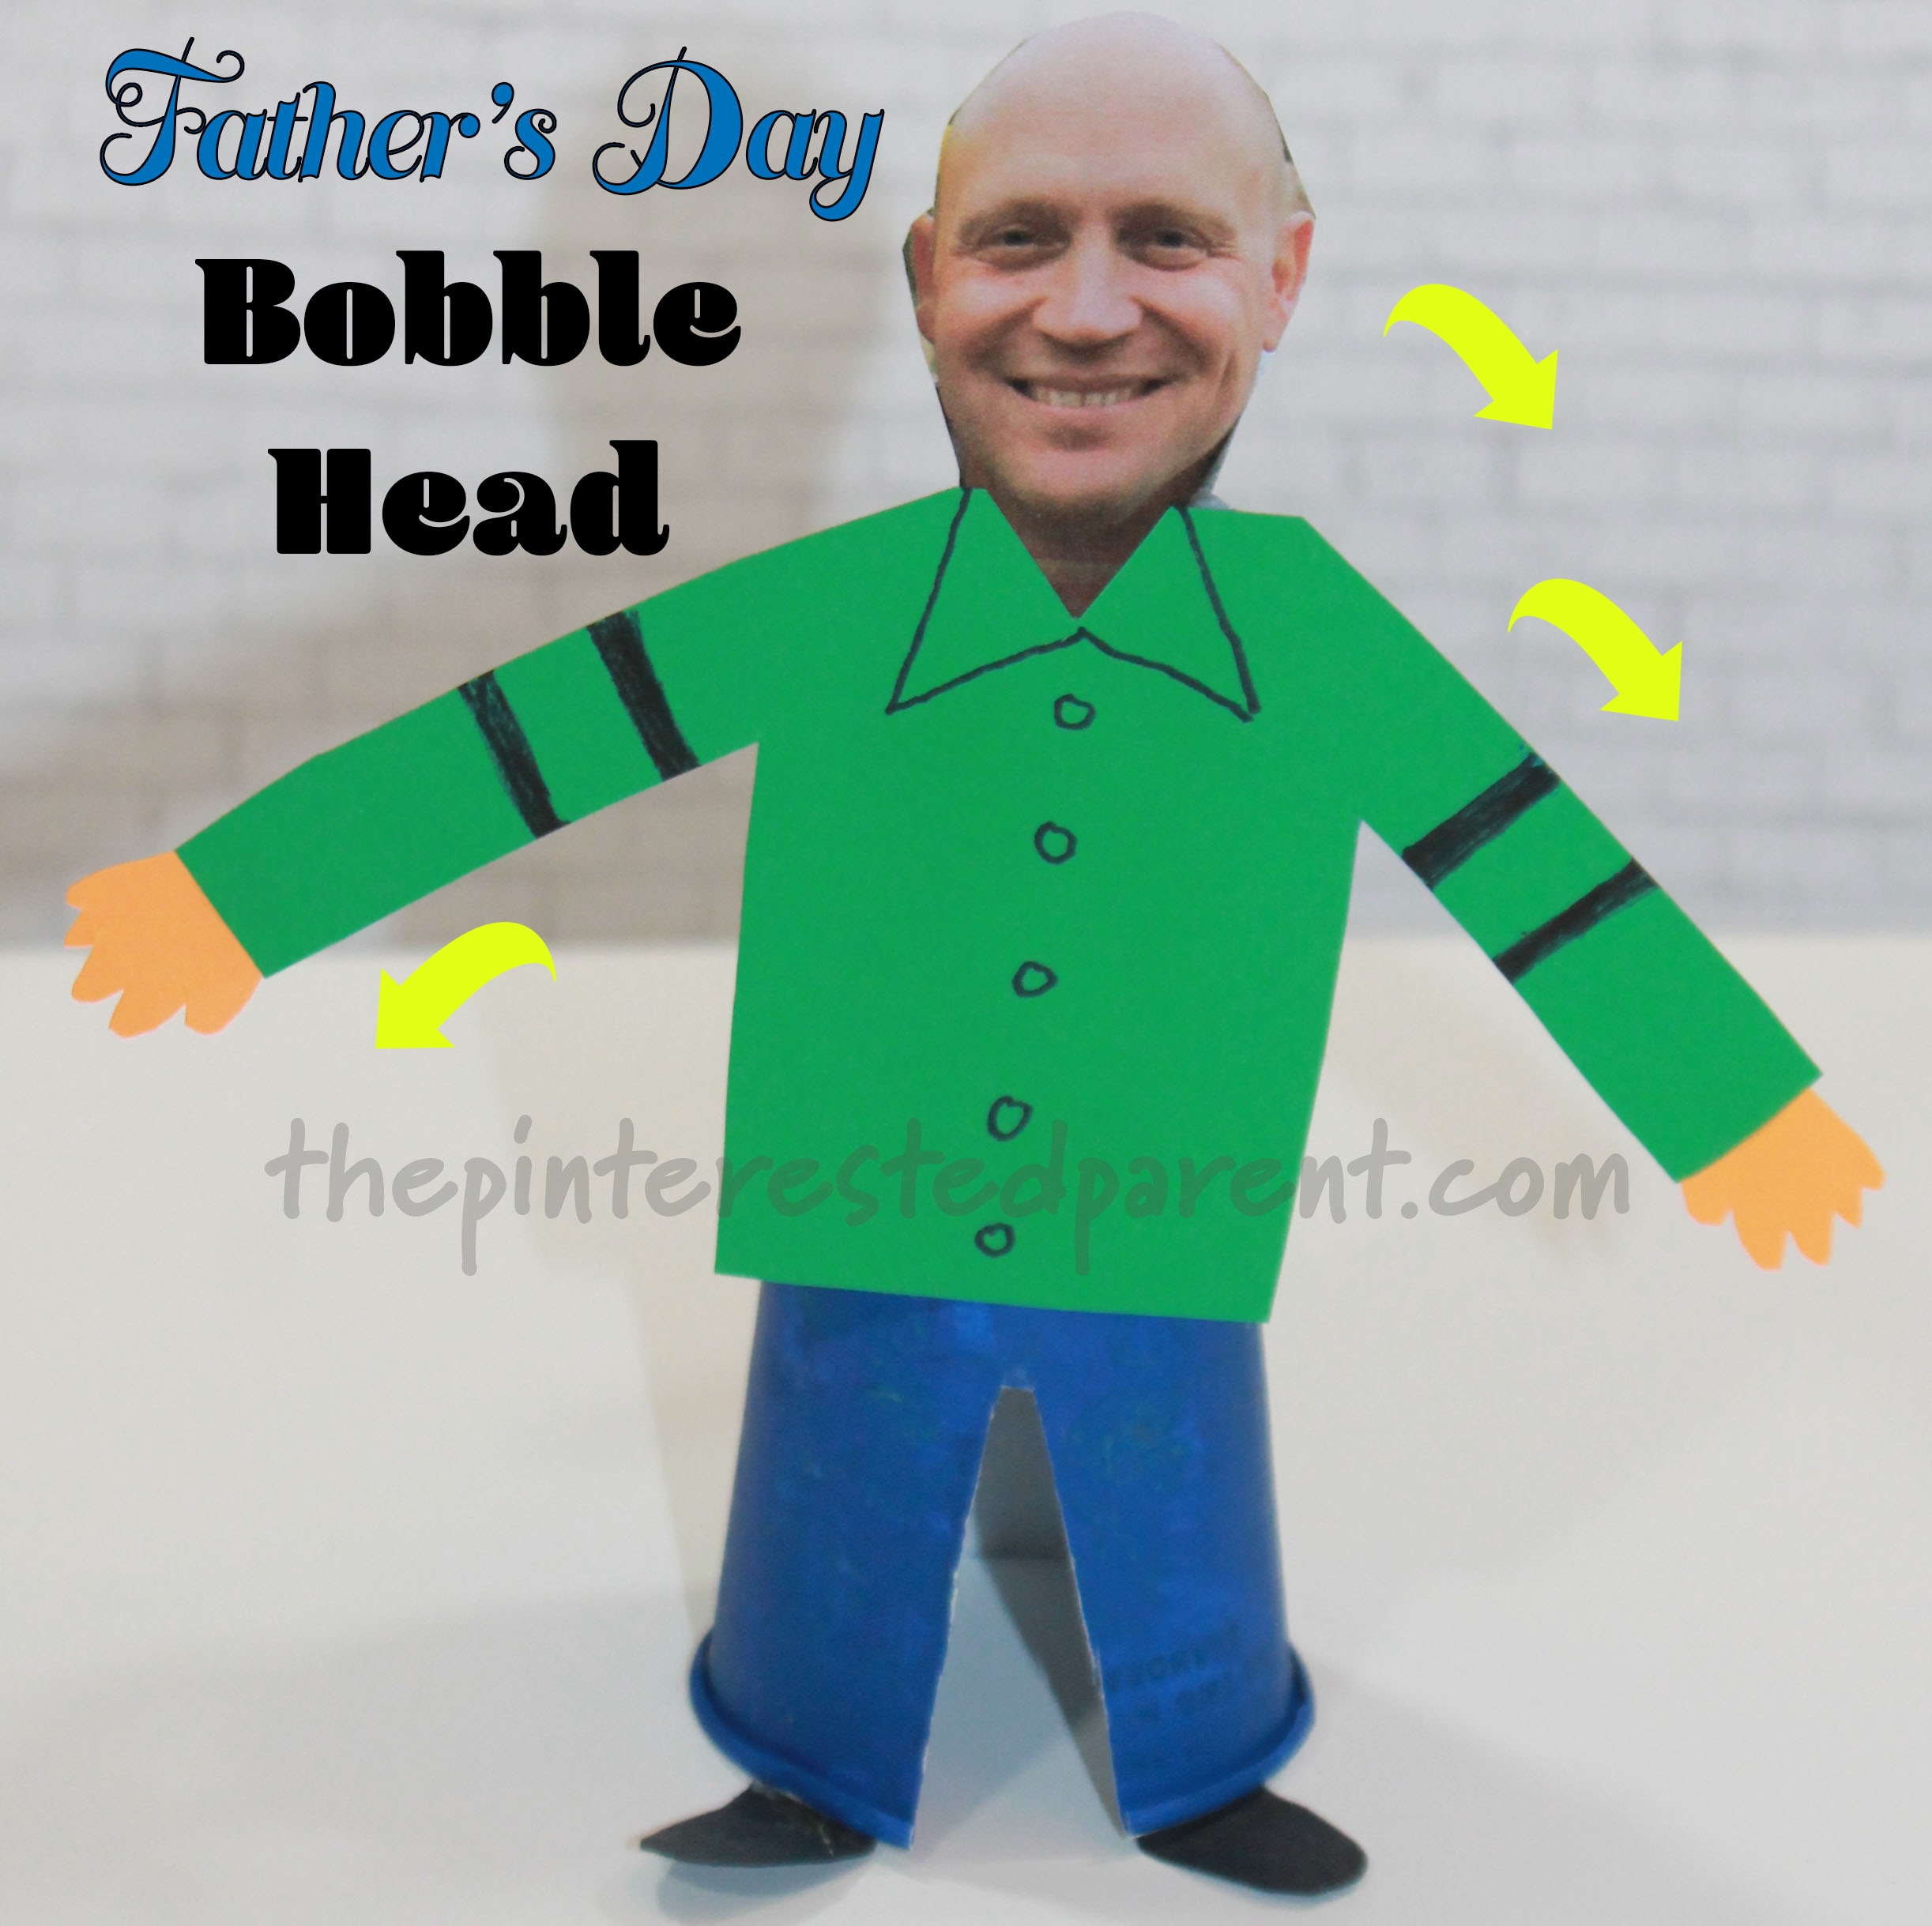 Father's Day Bobble Head Doll - Watch Dad bobble back and forth in this cute Dixie Cup craft for kids. #arts and crafts for kids